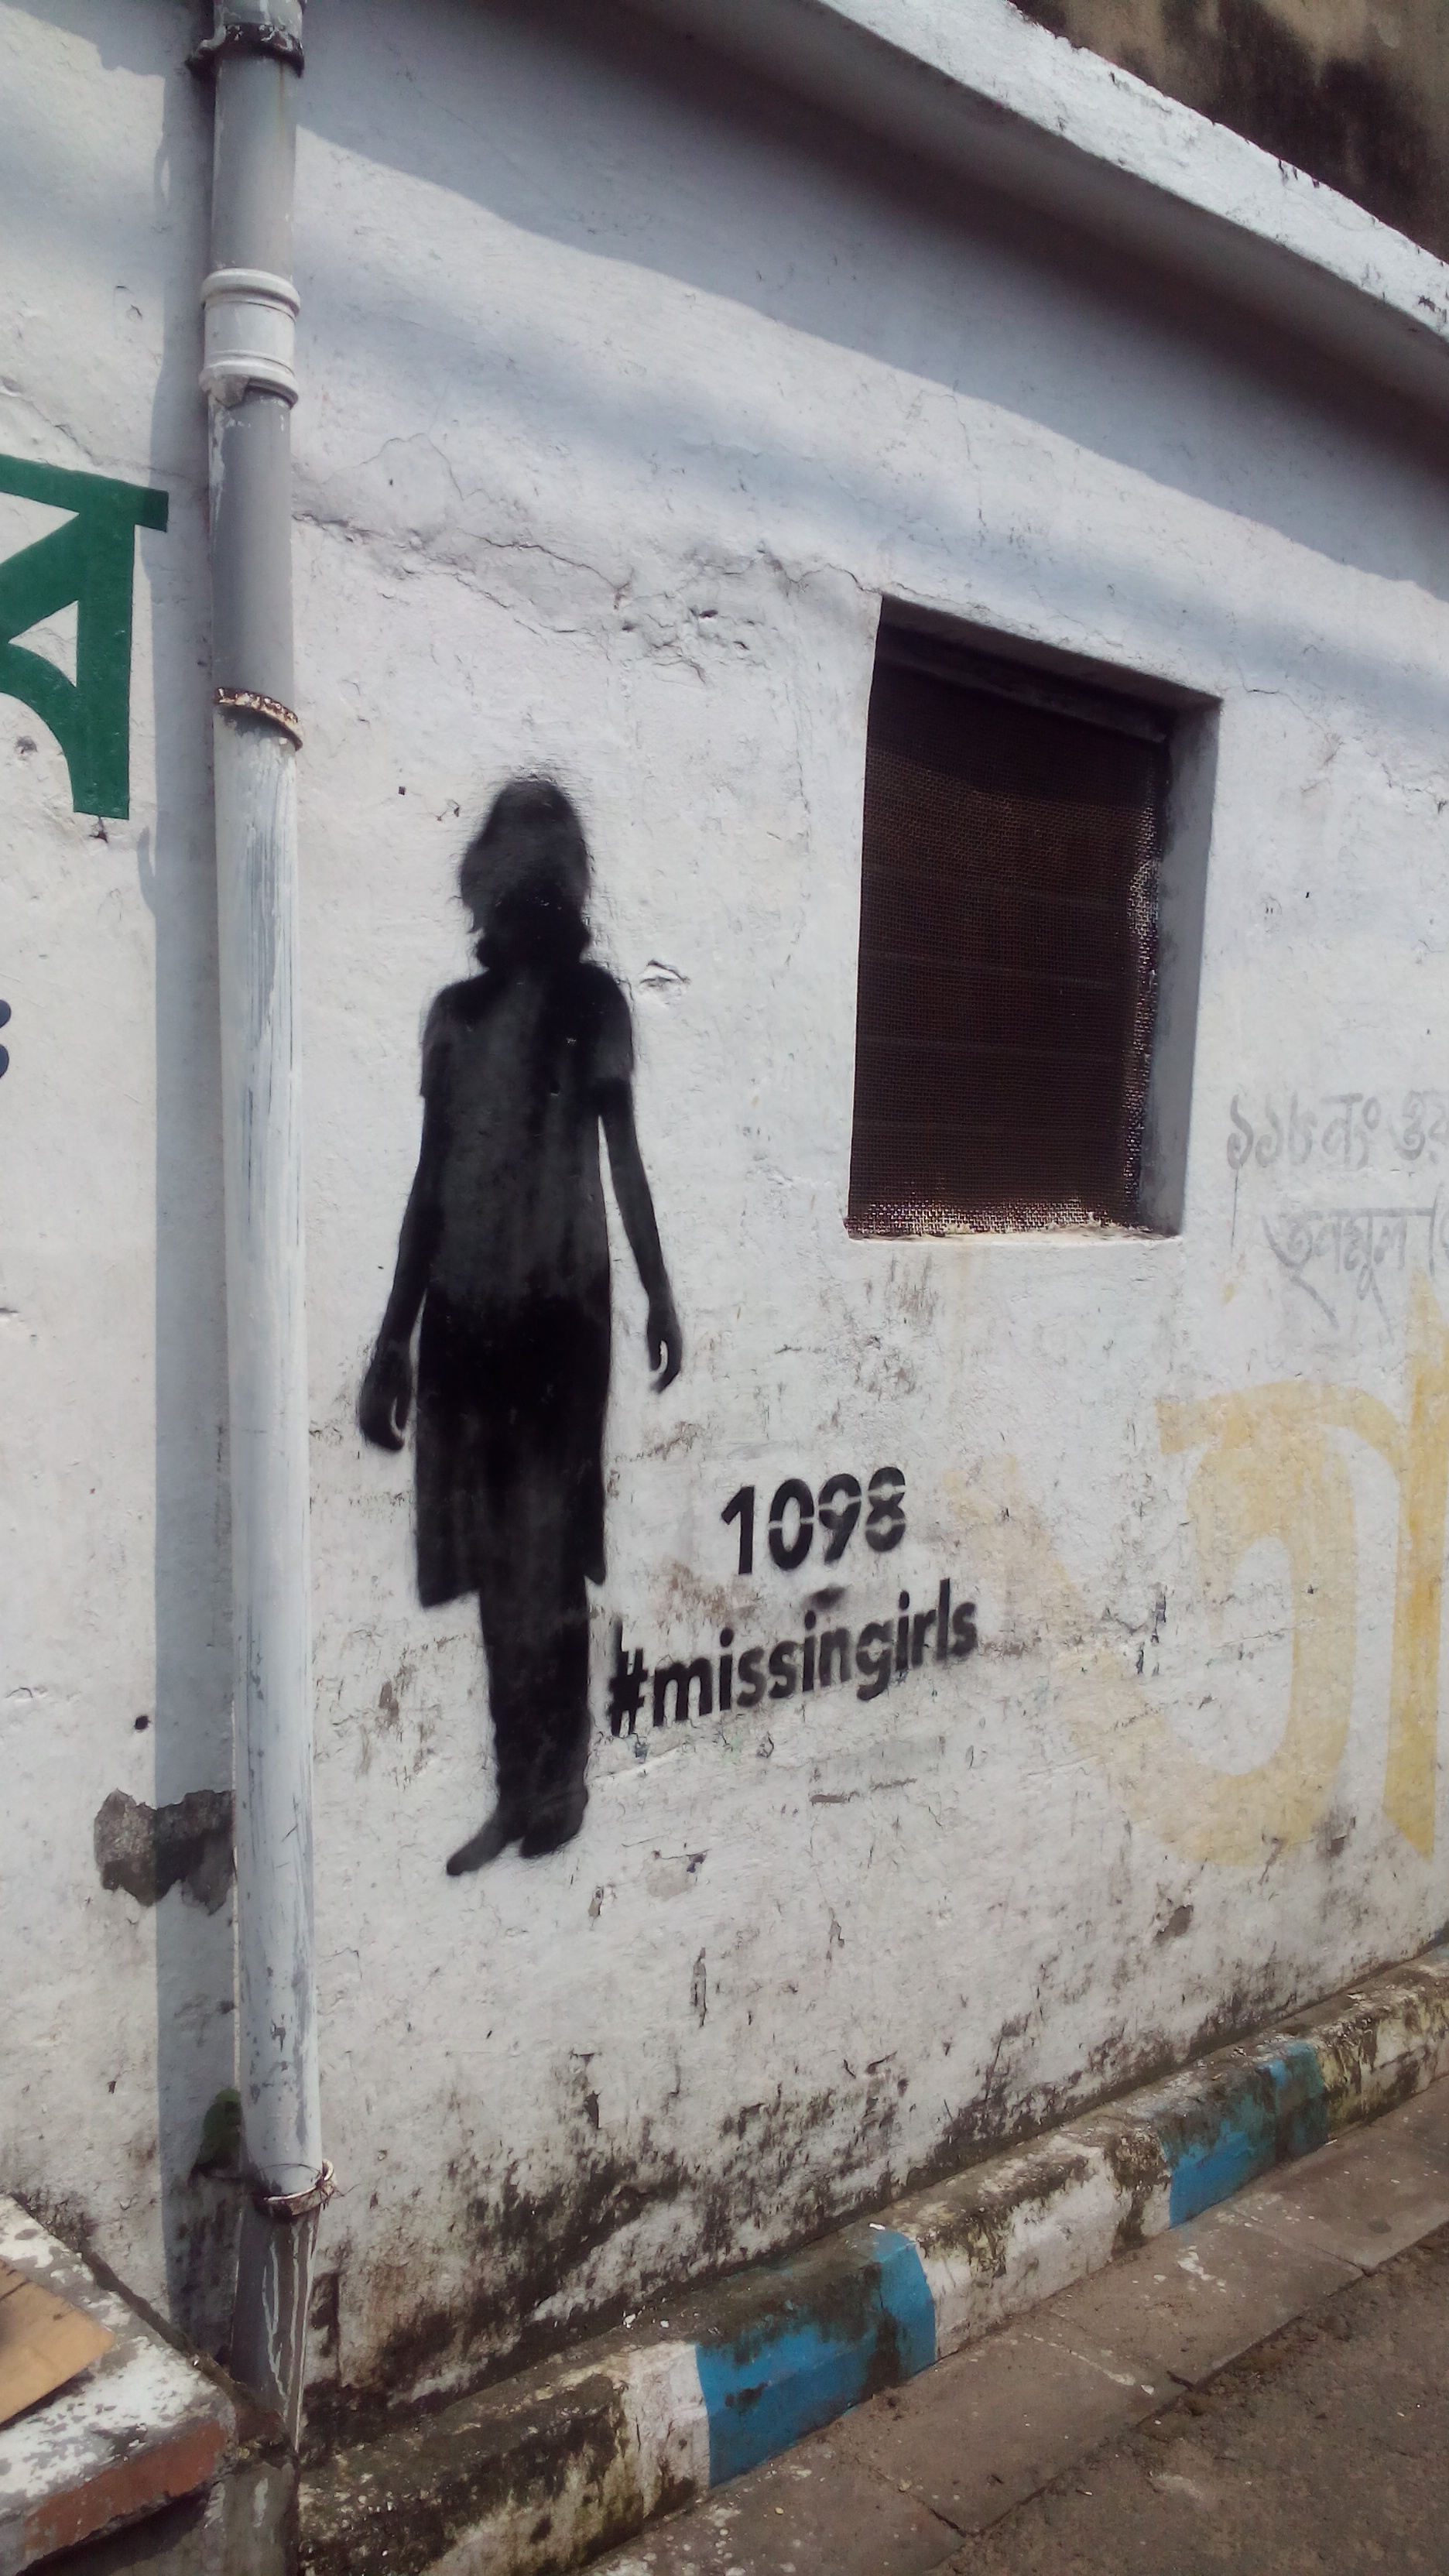 Stencil project by Missing girls -2017.jpg English: Stencil project Date 2 September 2016 Source Own work Author Leenakejriwal